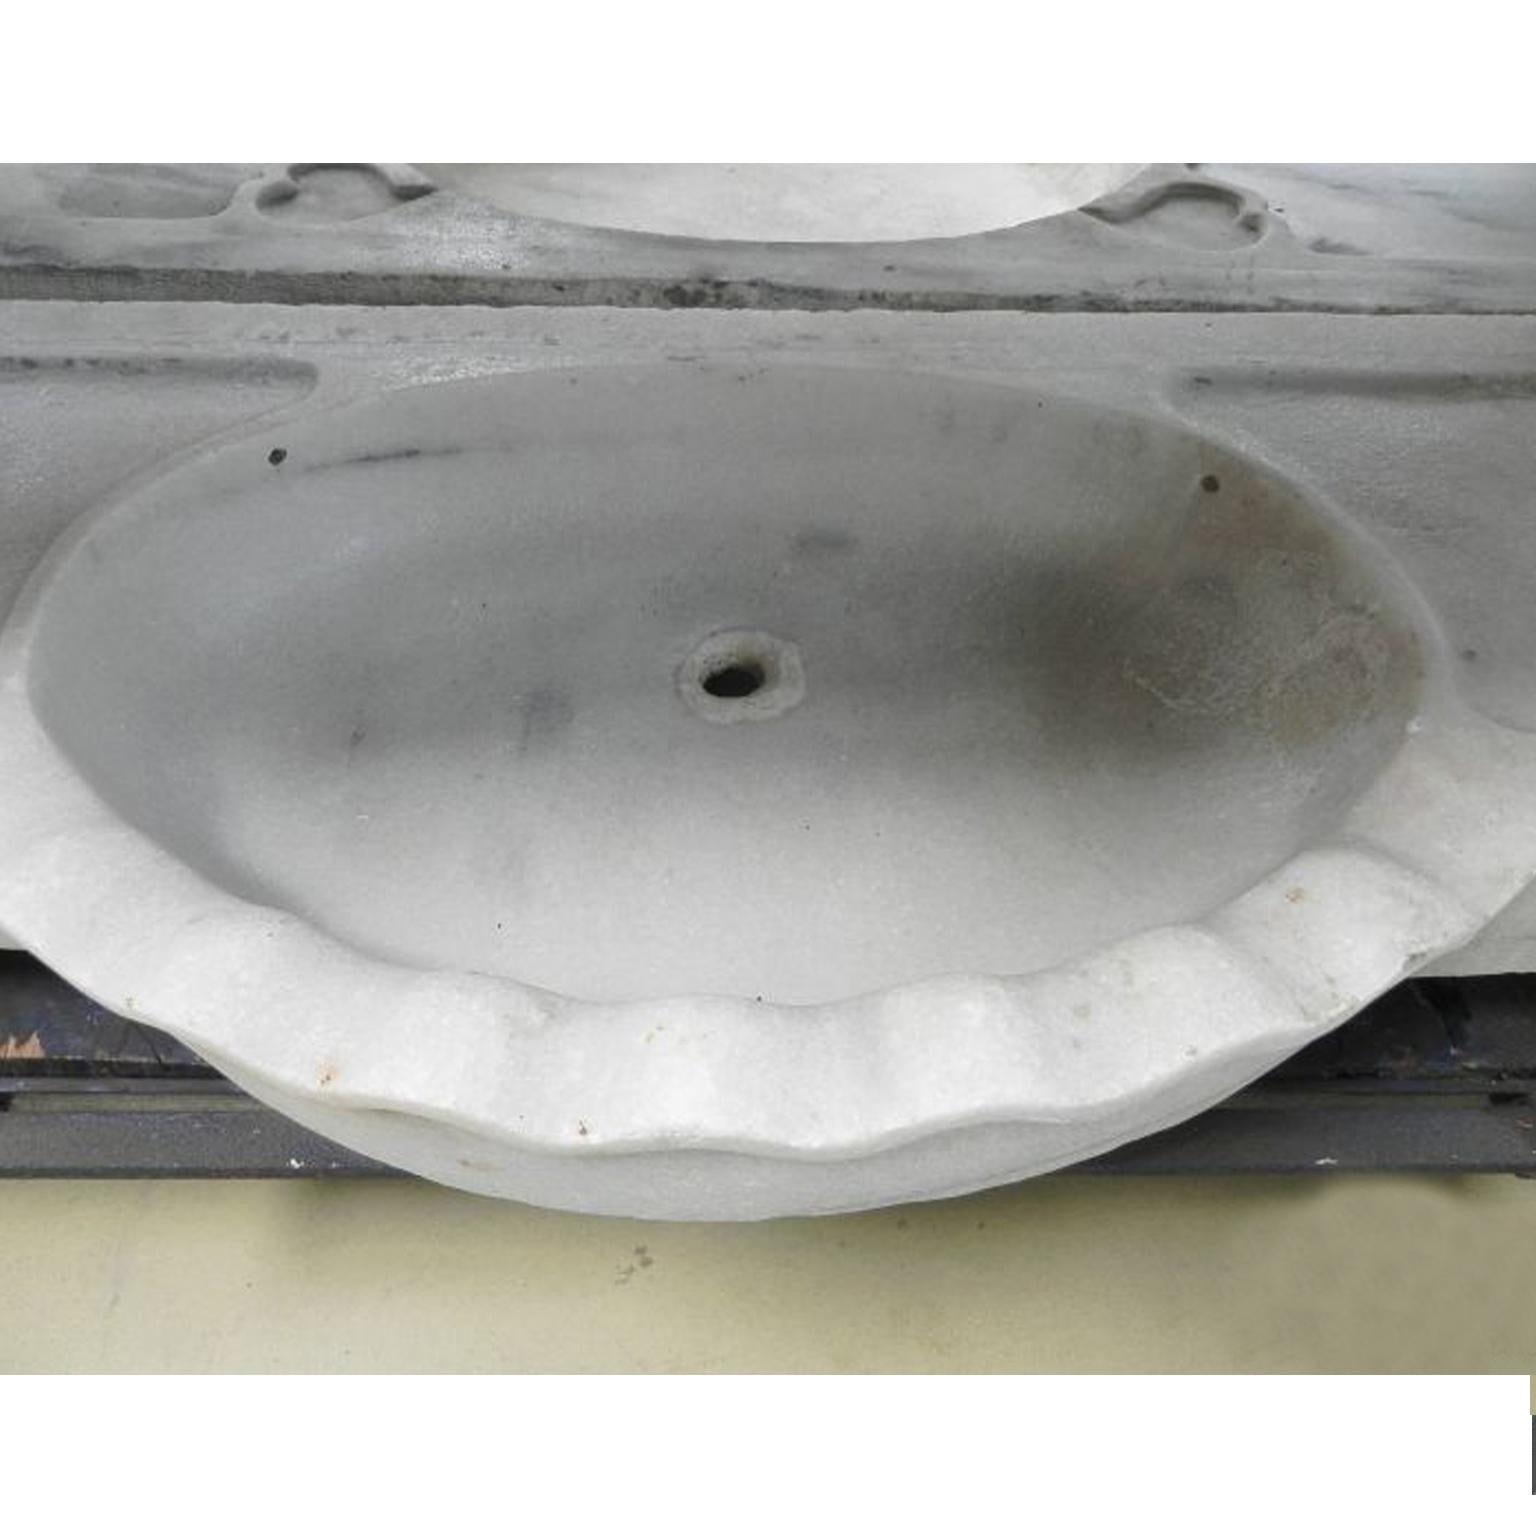 This timeless Italian classical sink is cut from one single block of white marble, these designs have not changed since Greek and Roman times, it carries superb artistic merit easily fitting in with old and new buildings.
This is now a period style